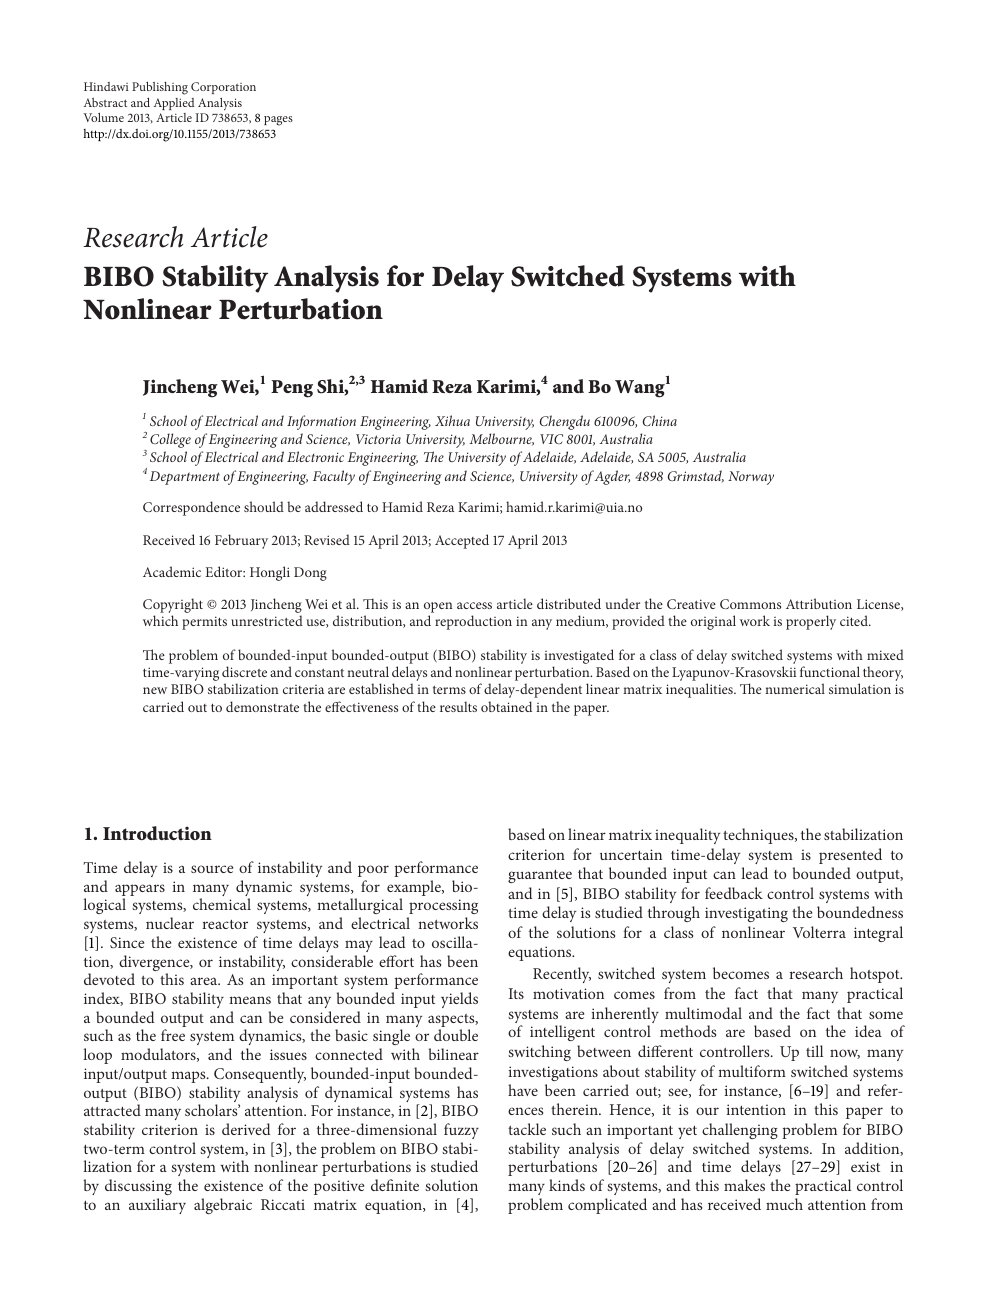 Bibo Stability Analysis For Delay Switched Systems With Nonlinear Perturbation Topic Of Research Paper In Mathematics Download Scholarly Article Pdf And Read For Free On Cyberleninka Open Science Hub